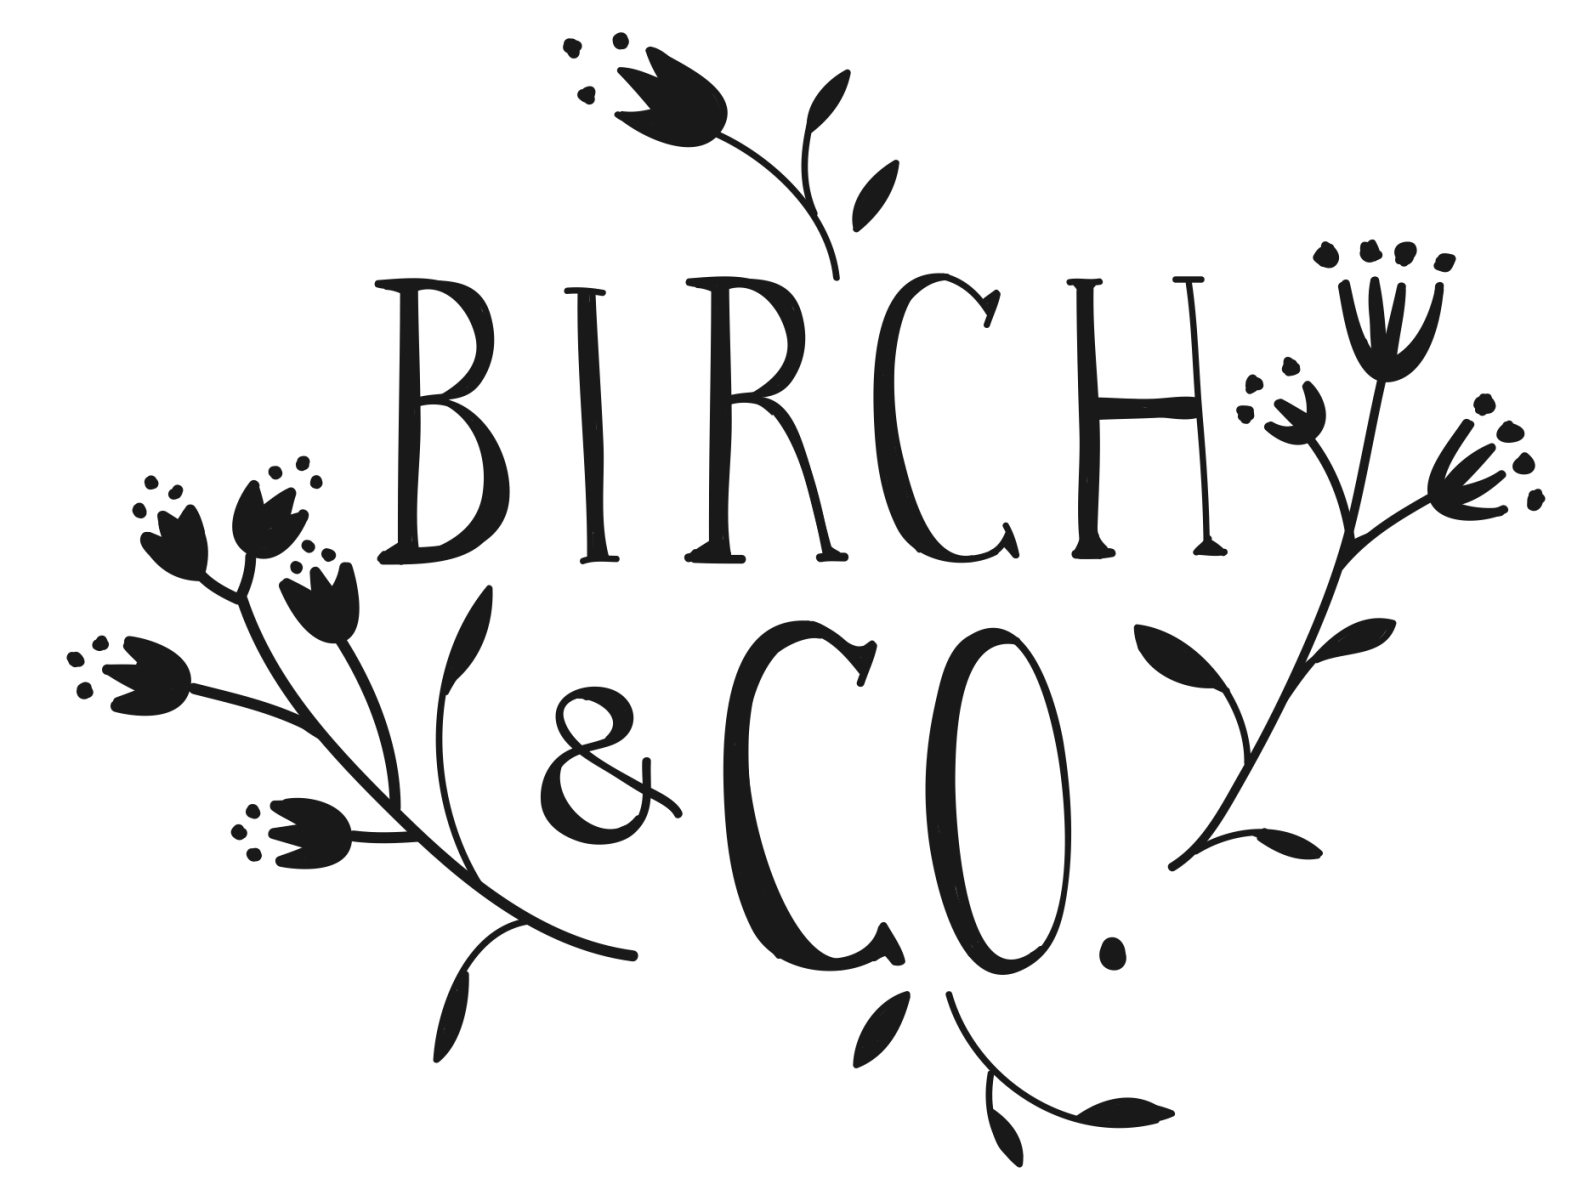 Birch & Co. Logo by Emily Small by Emily Small on Dribbble